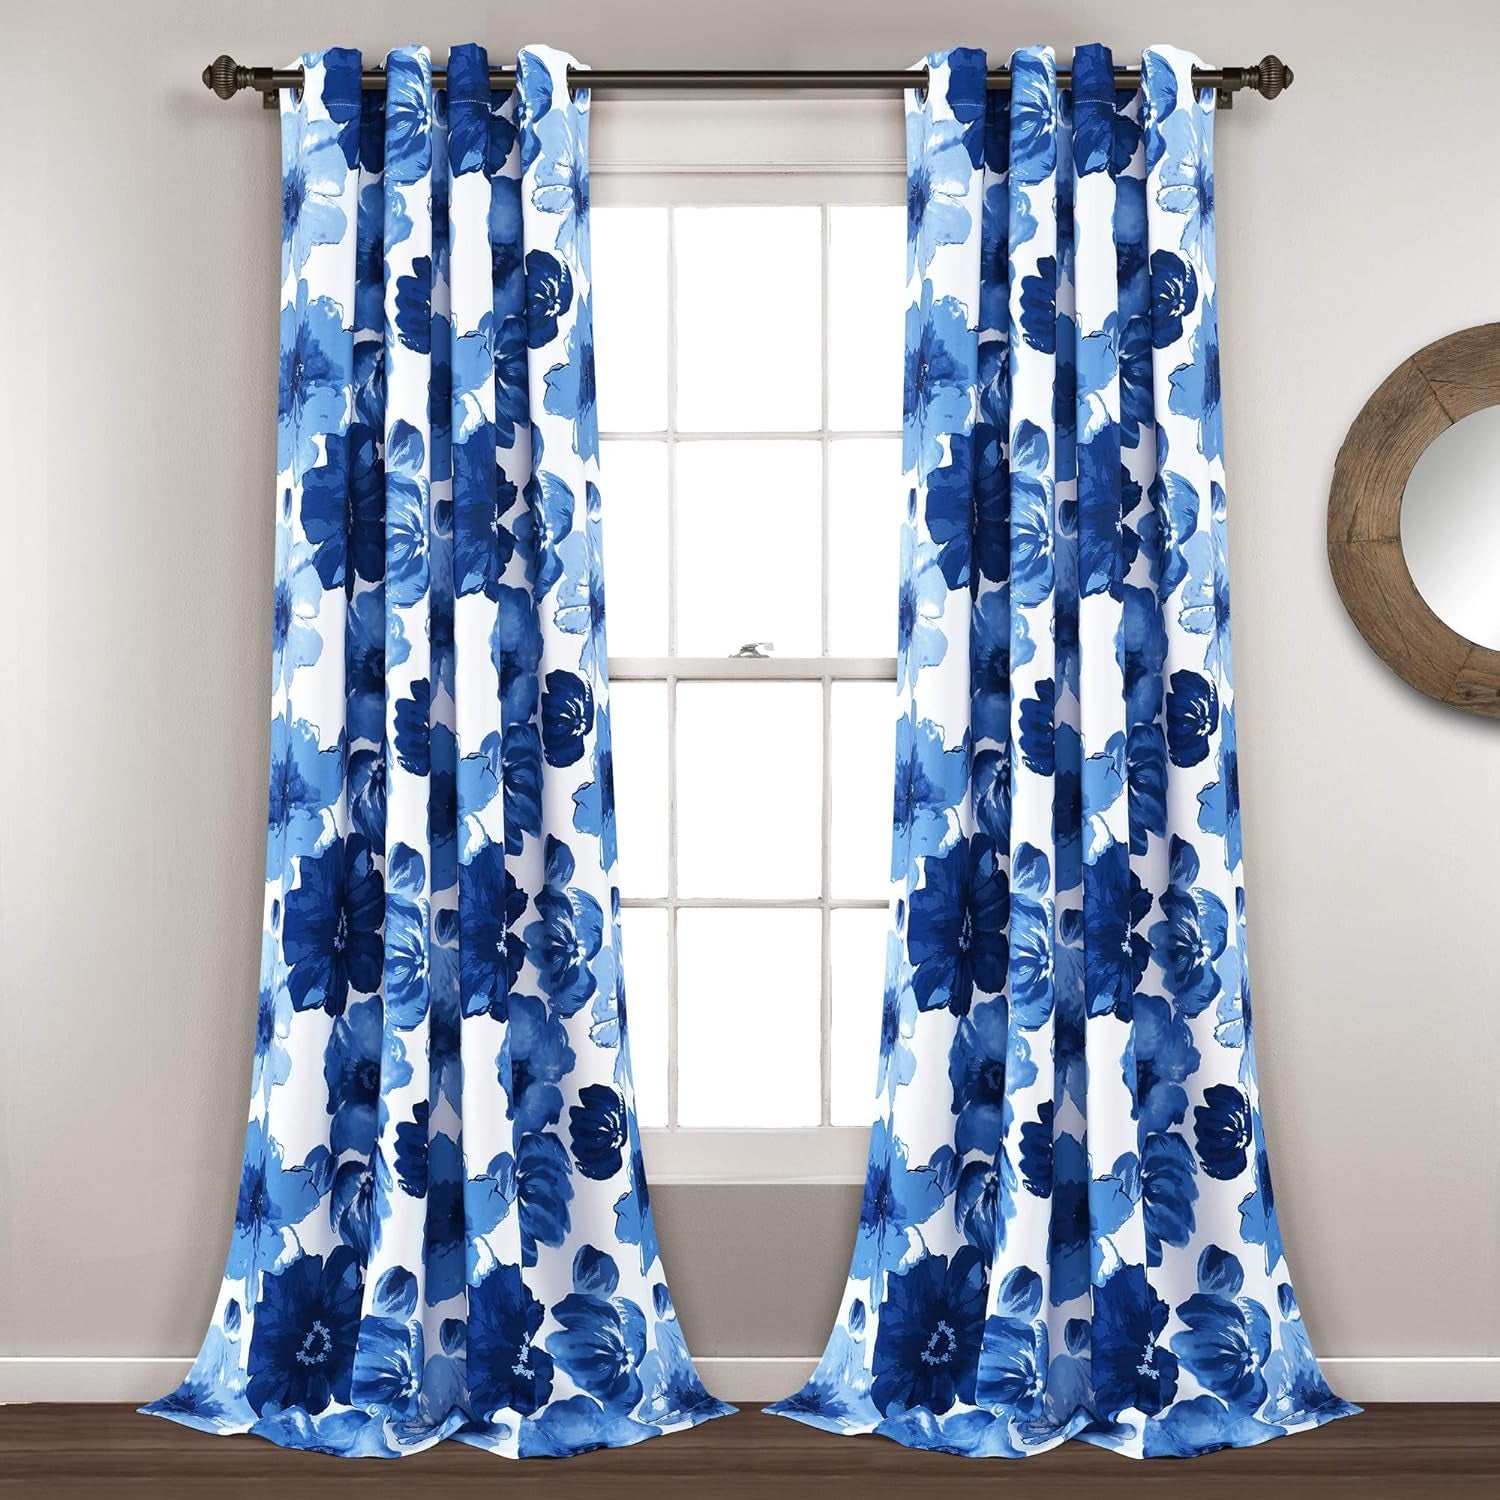 Leah Light Filtering Window Curtain Panel Pair Floral Insulated Grommet, 52"W X 84"L, Navy and White